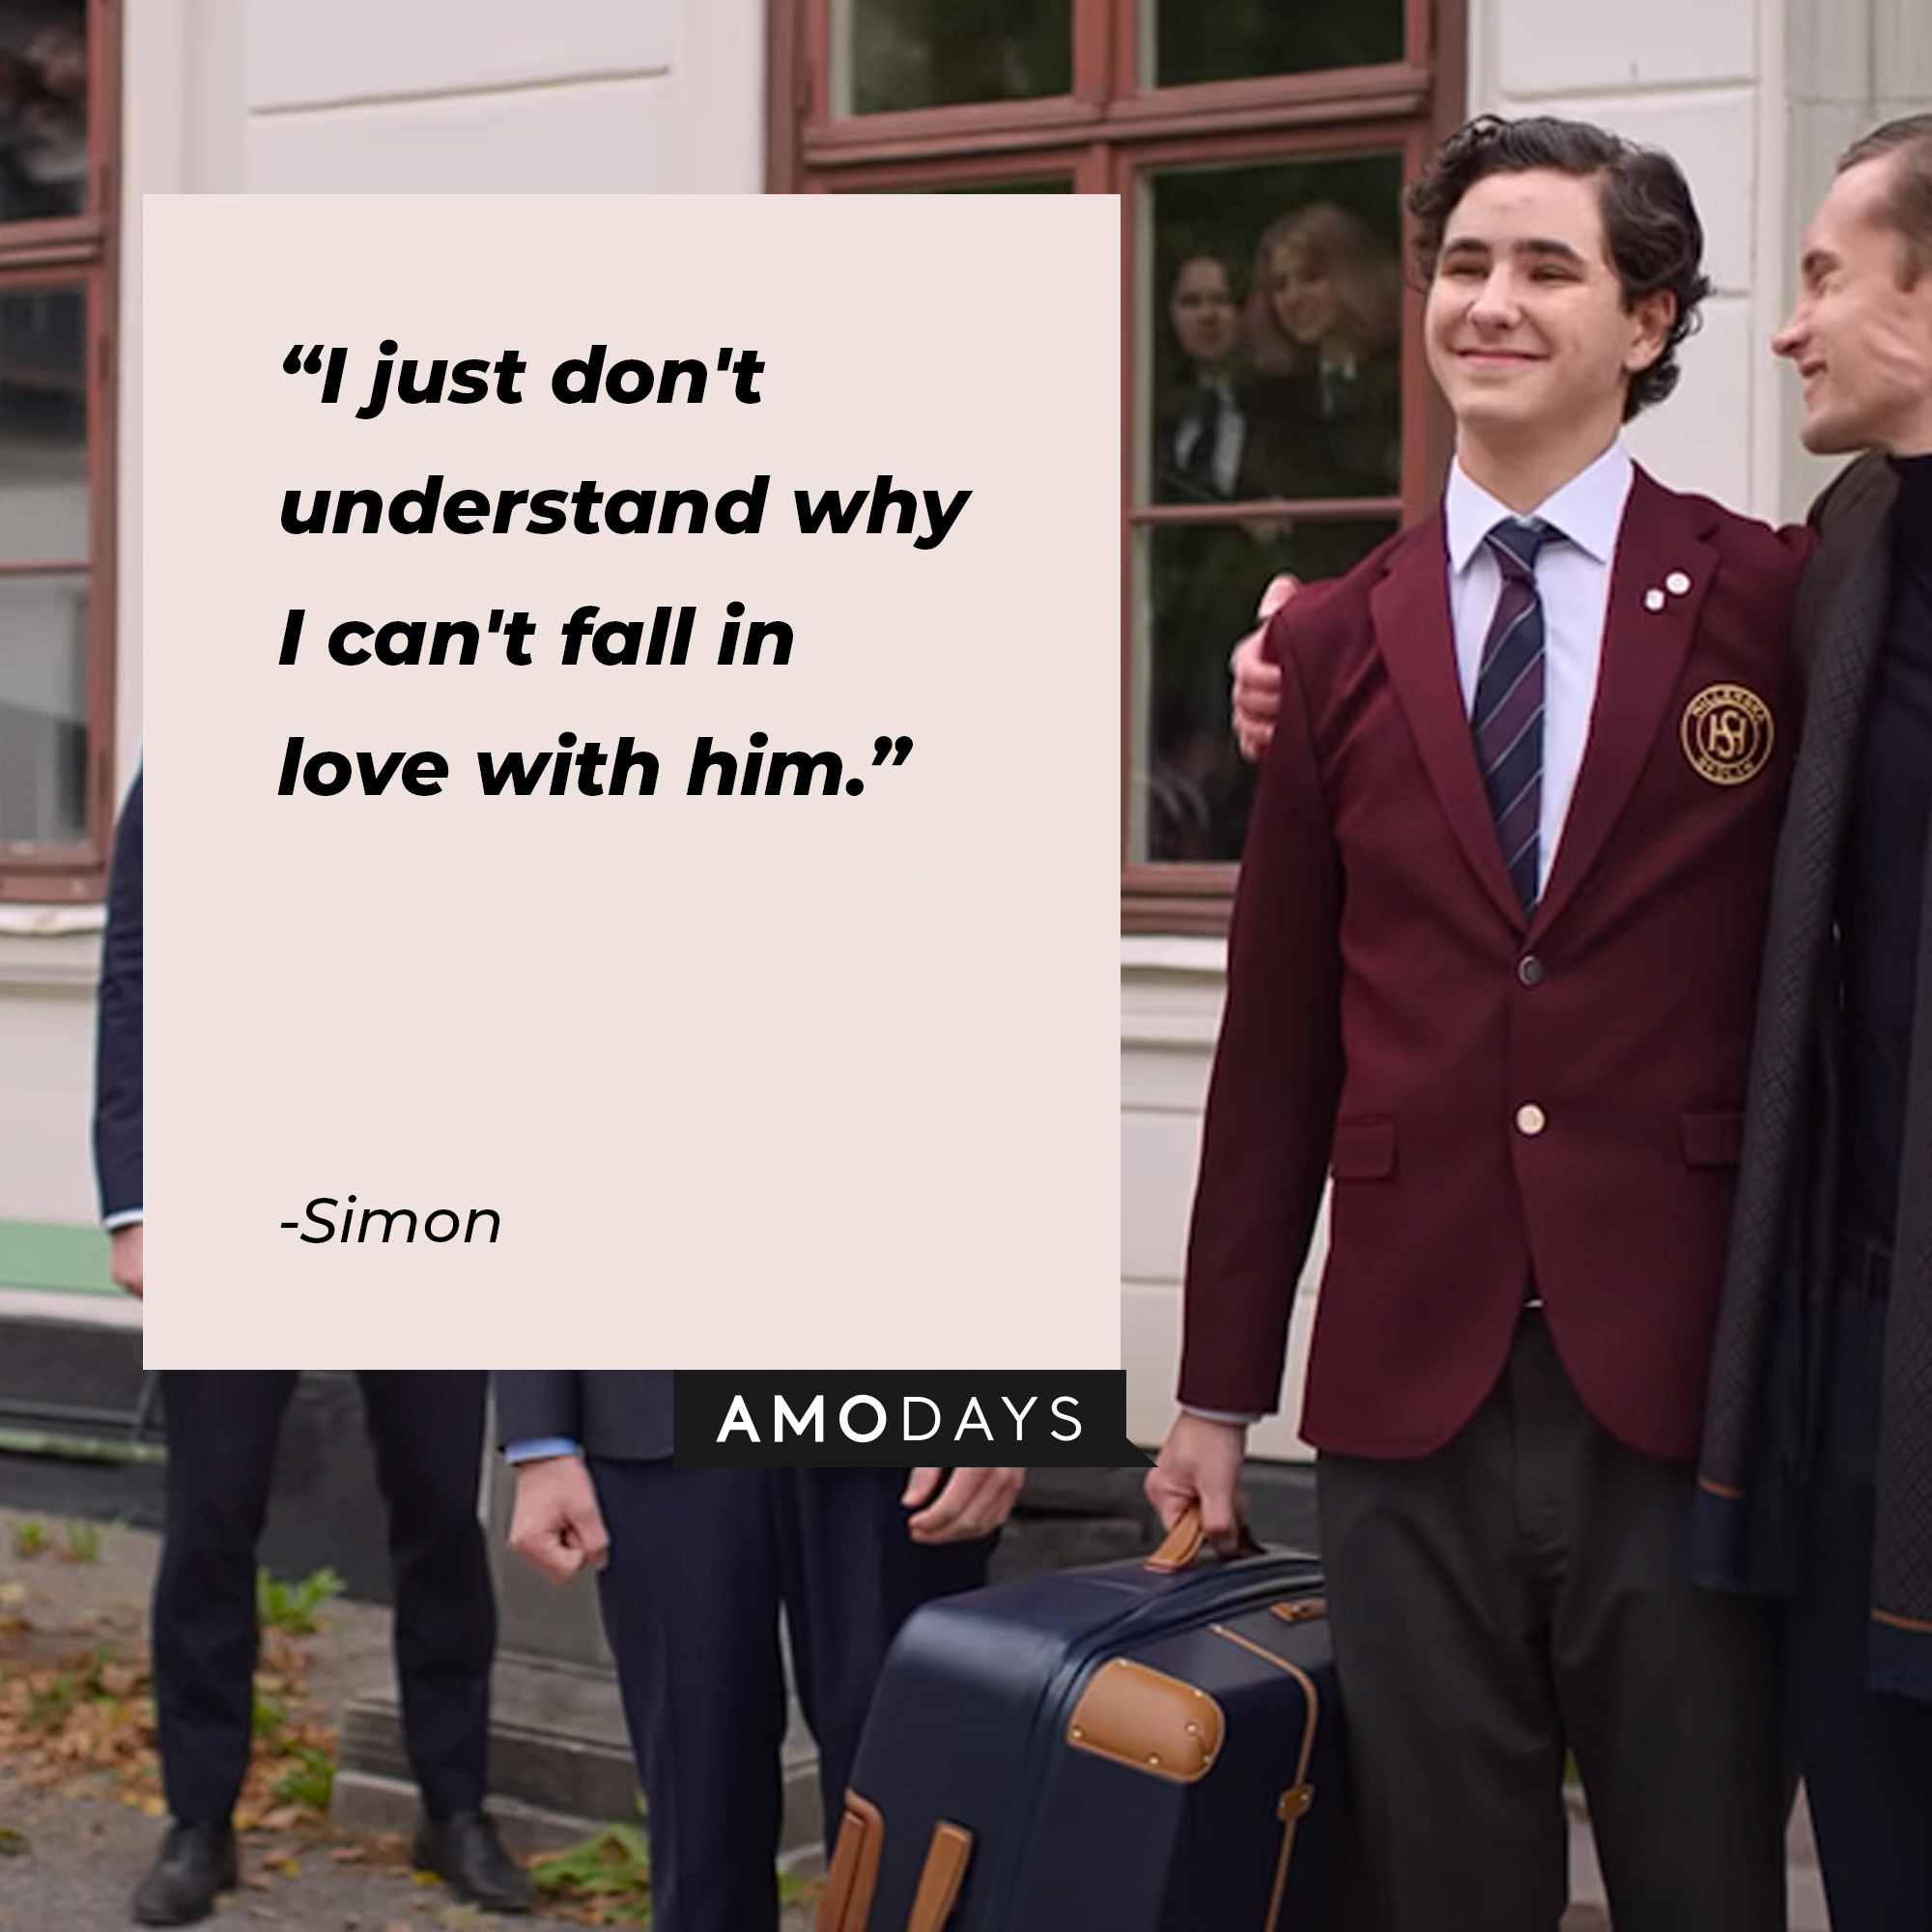 Simon’s quote: "I just don't understand why I can't fall in love with him." | Image: Youtube.com/Netflix